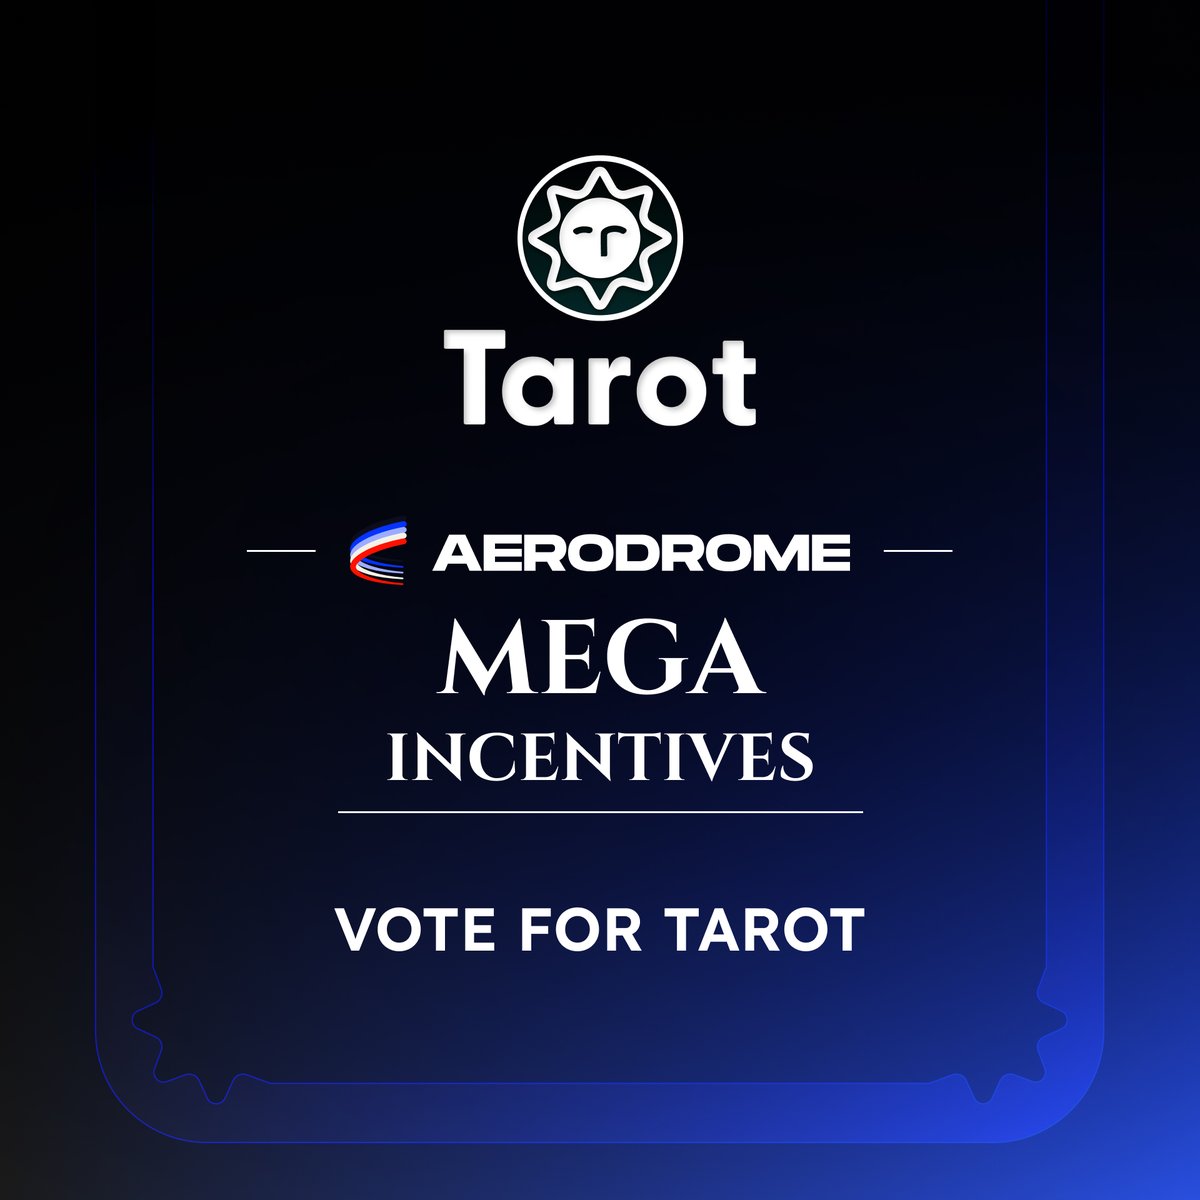 ✈️ Aerodrome Mega-Incentives To commemorate the launch of The Tower on @base, 50,000 $AERO has been allocated towards voting incentives for TAROT pairs on @aerodromefi: WETH/TAROT: 25K AERO AERO/TAROT: 25K AERO These incentives currently total over $92,000! Vote for Tarot!